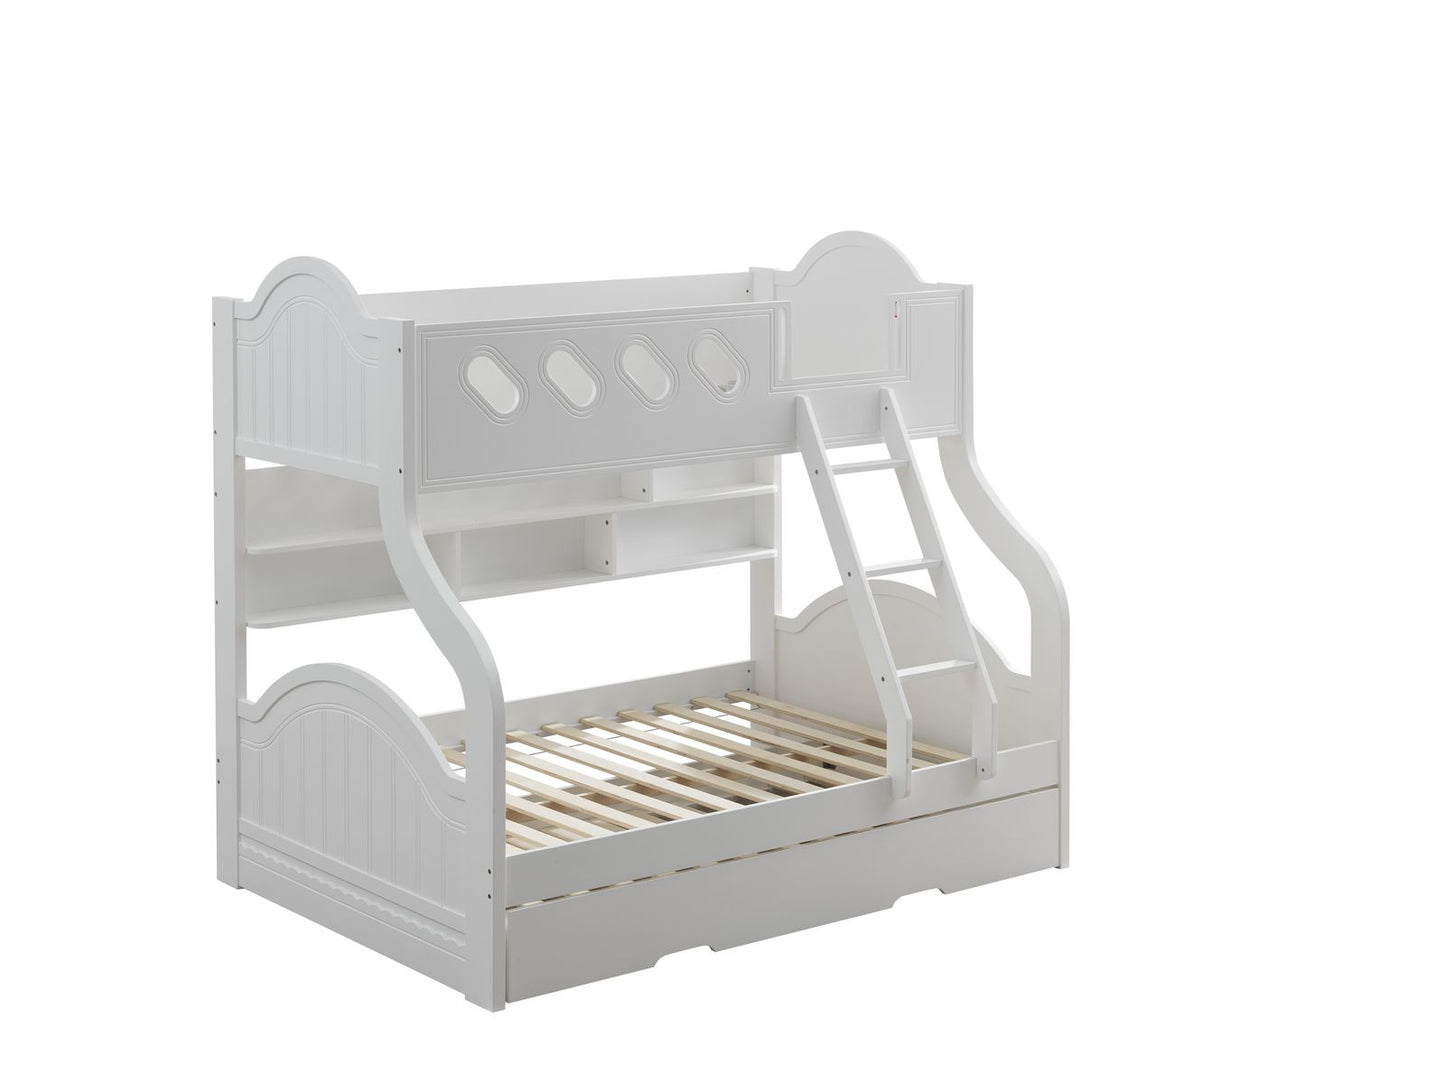 Grover Twin/Full Bunk Bed w/, White